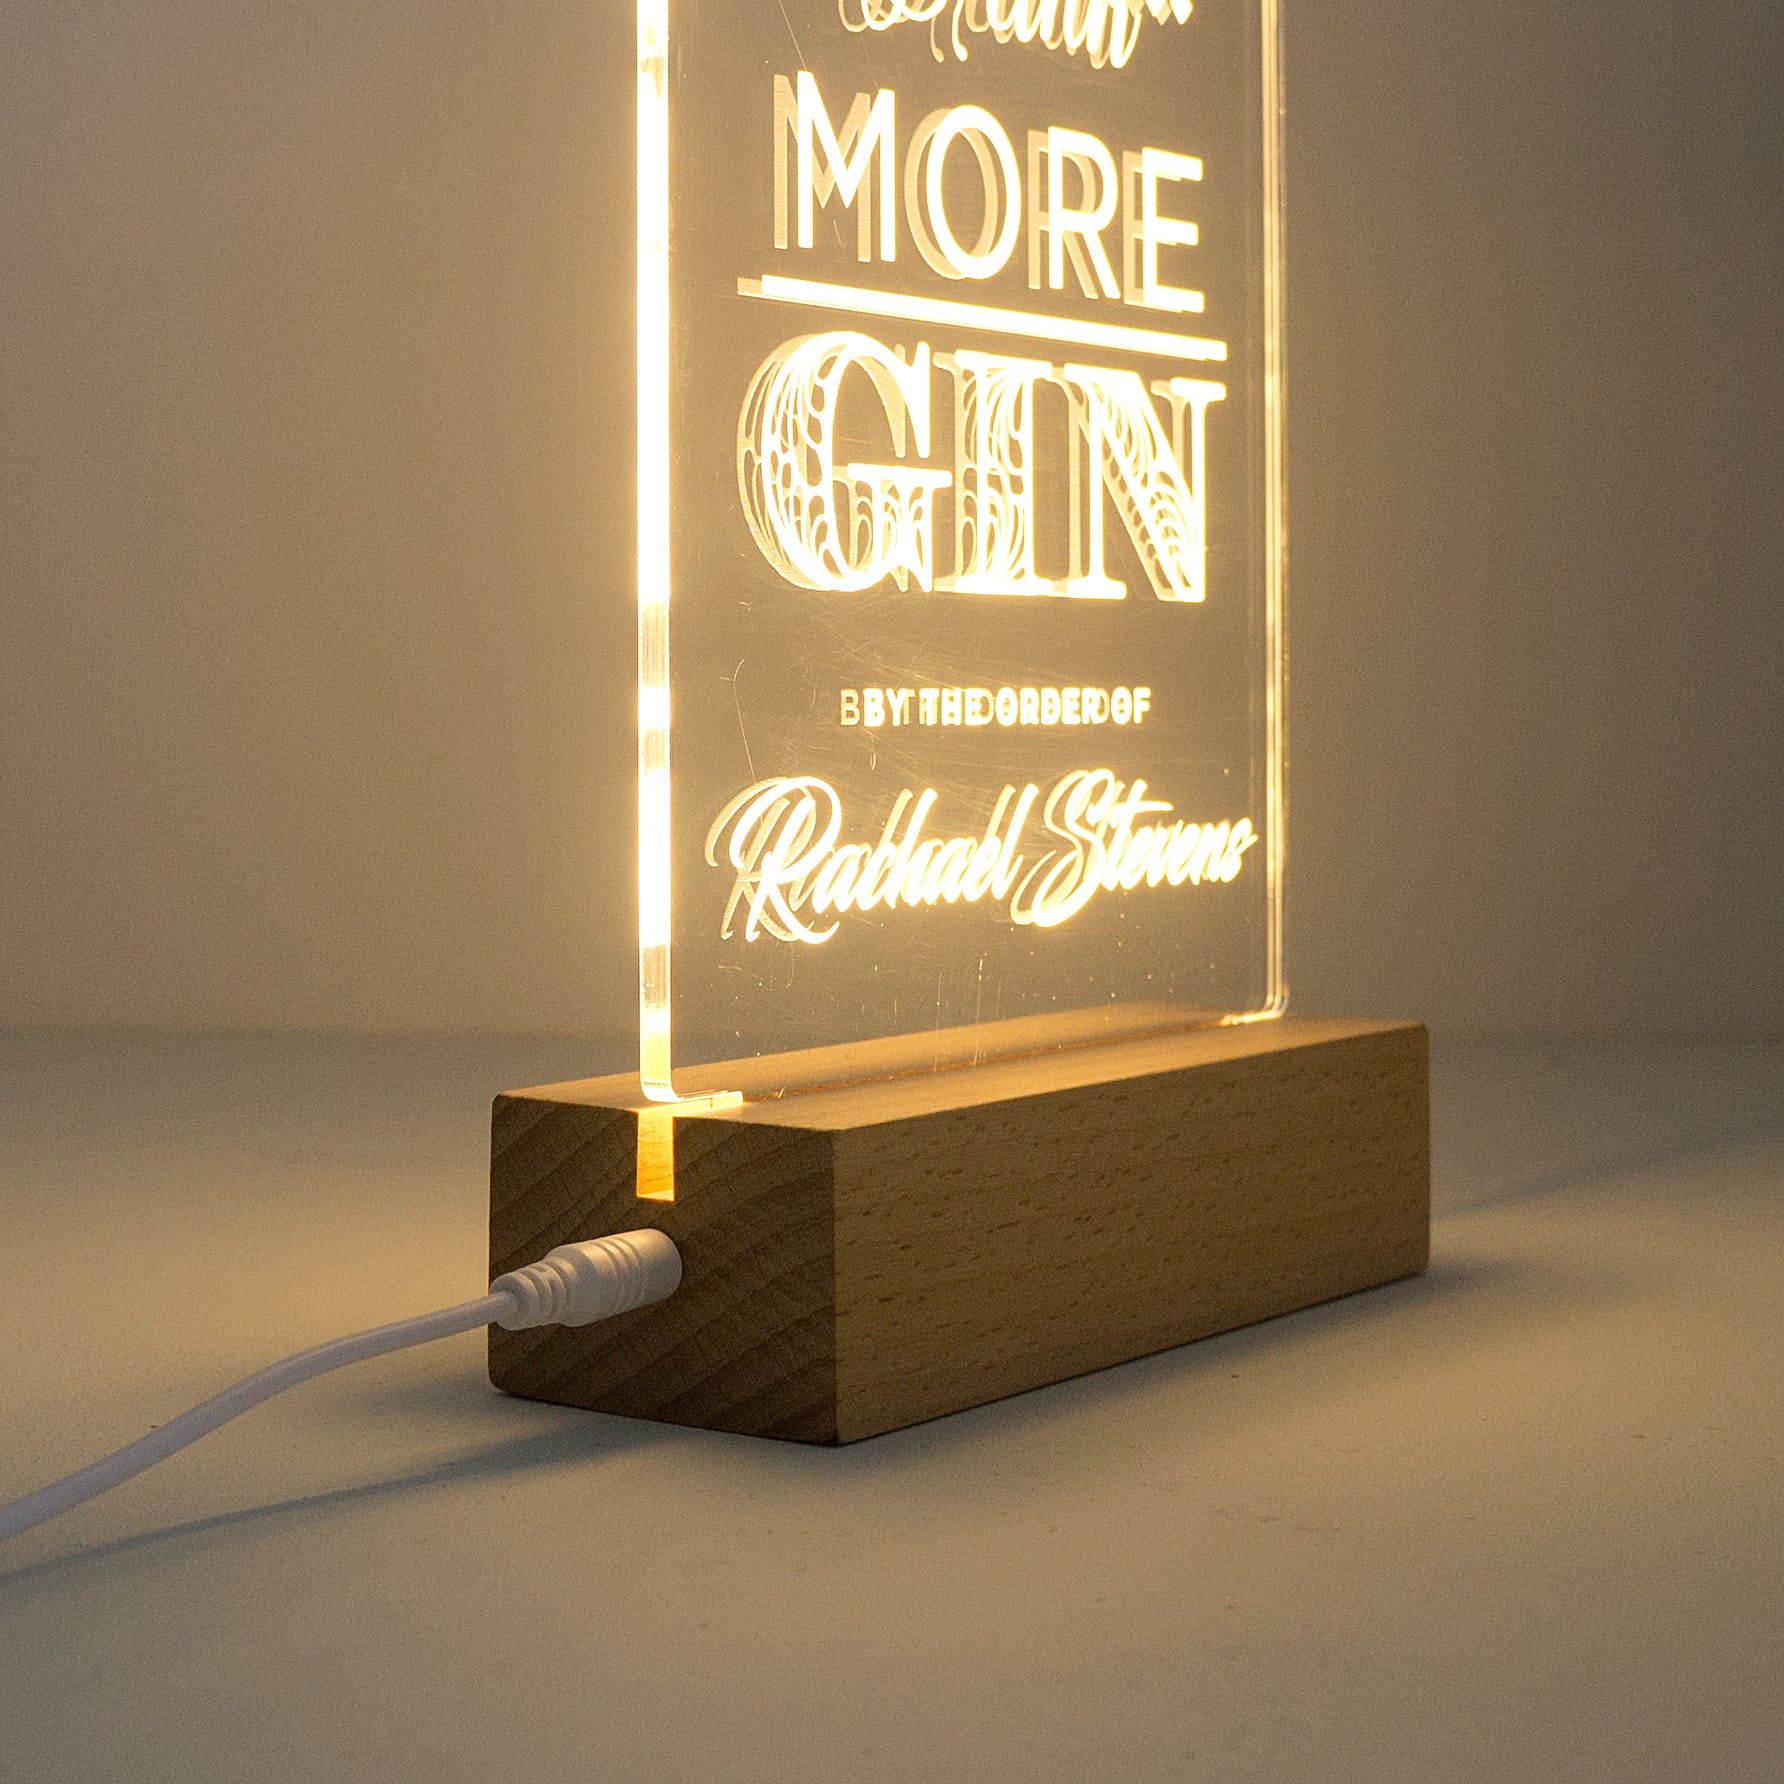 Drink more gin LED sign